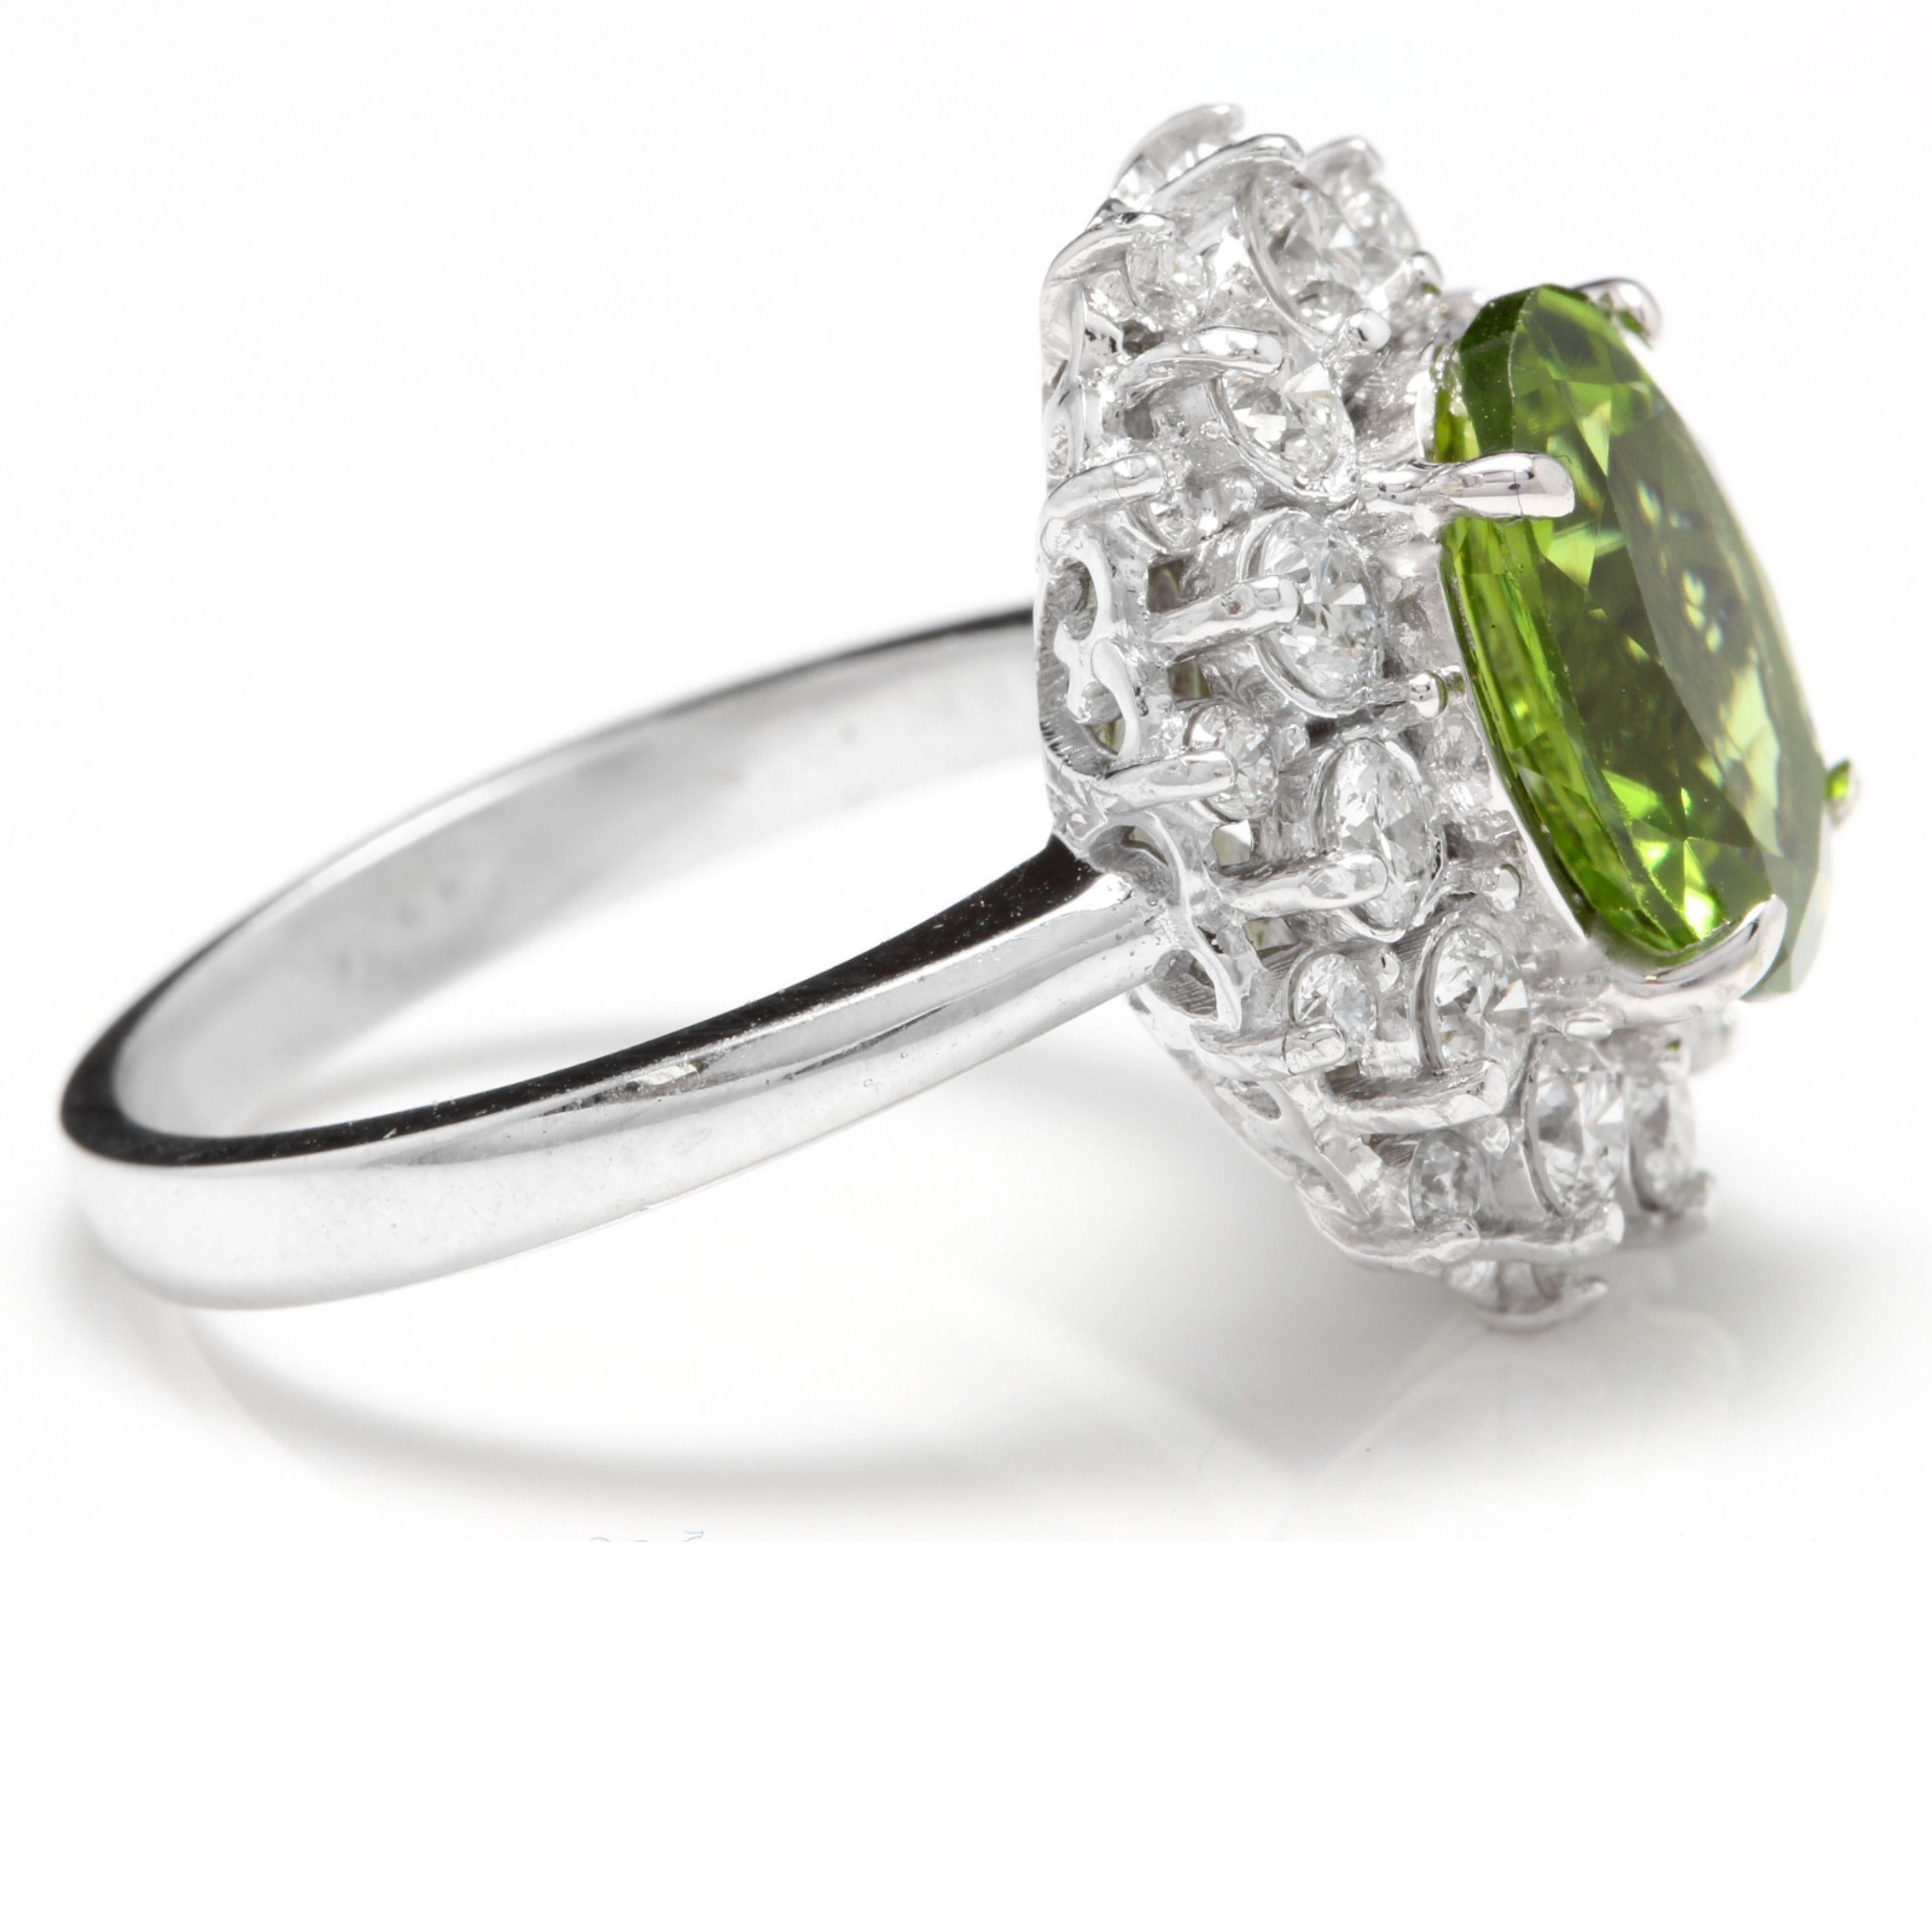 Mixed Cut 4.85 Ct Natural Very Nice Looking Peridot and Diamond 14K Solid White Gold Ring For Sale